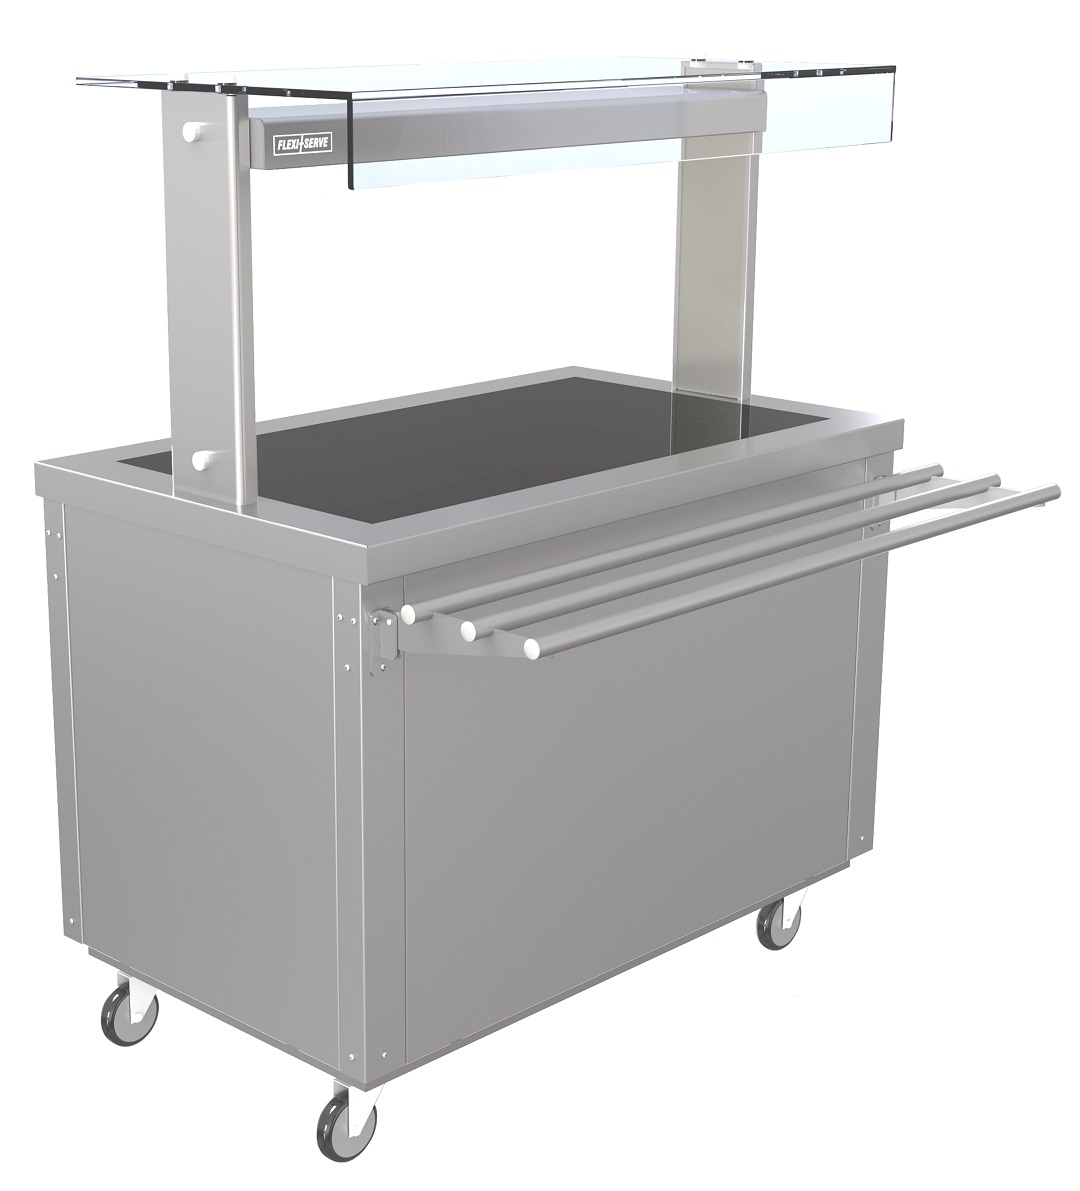 Parry Flexi-Serve FS-HT3 Hot Cupboard With Hot Top